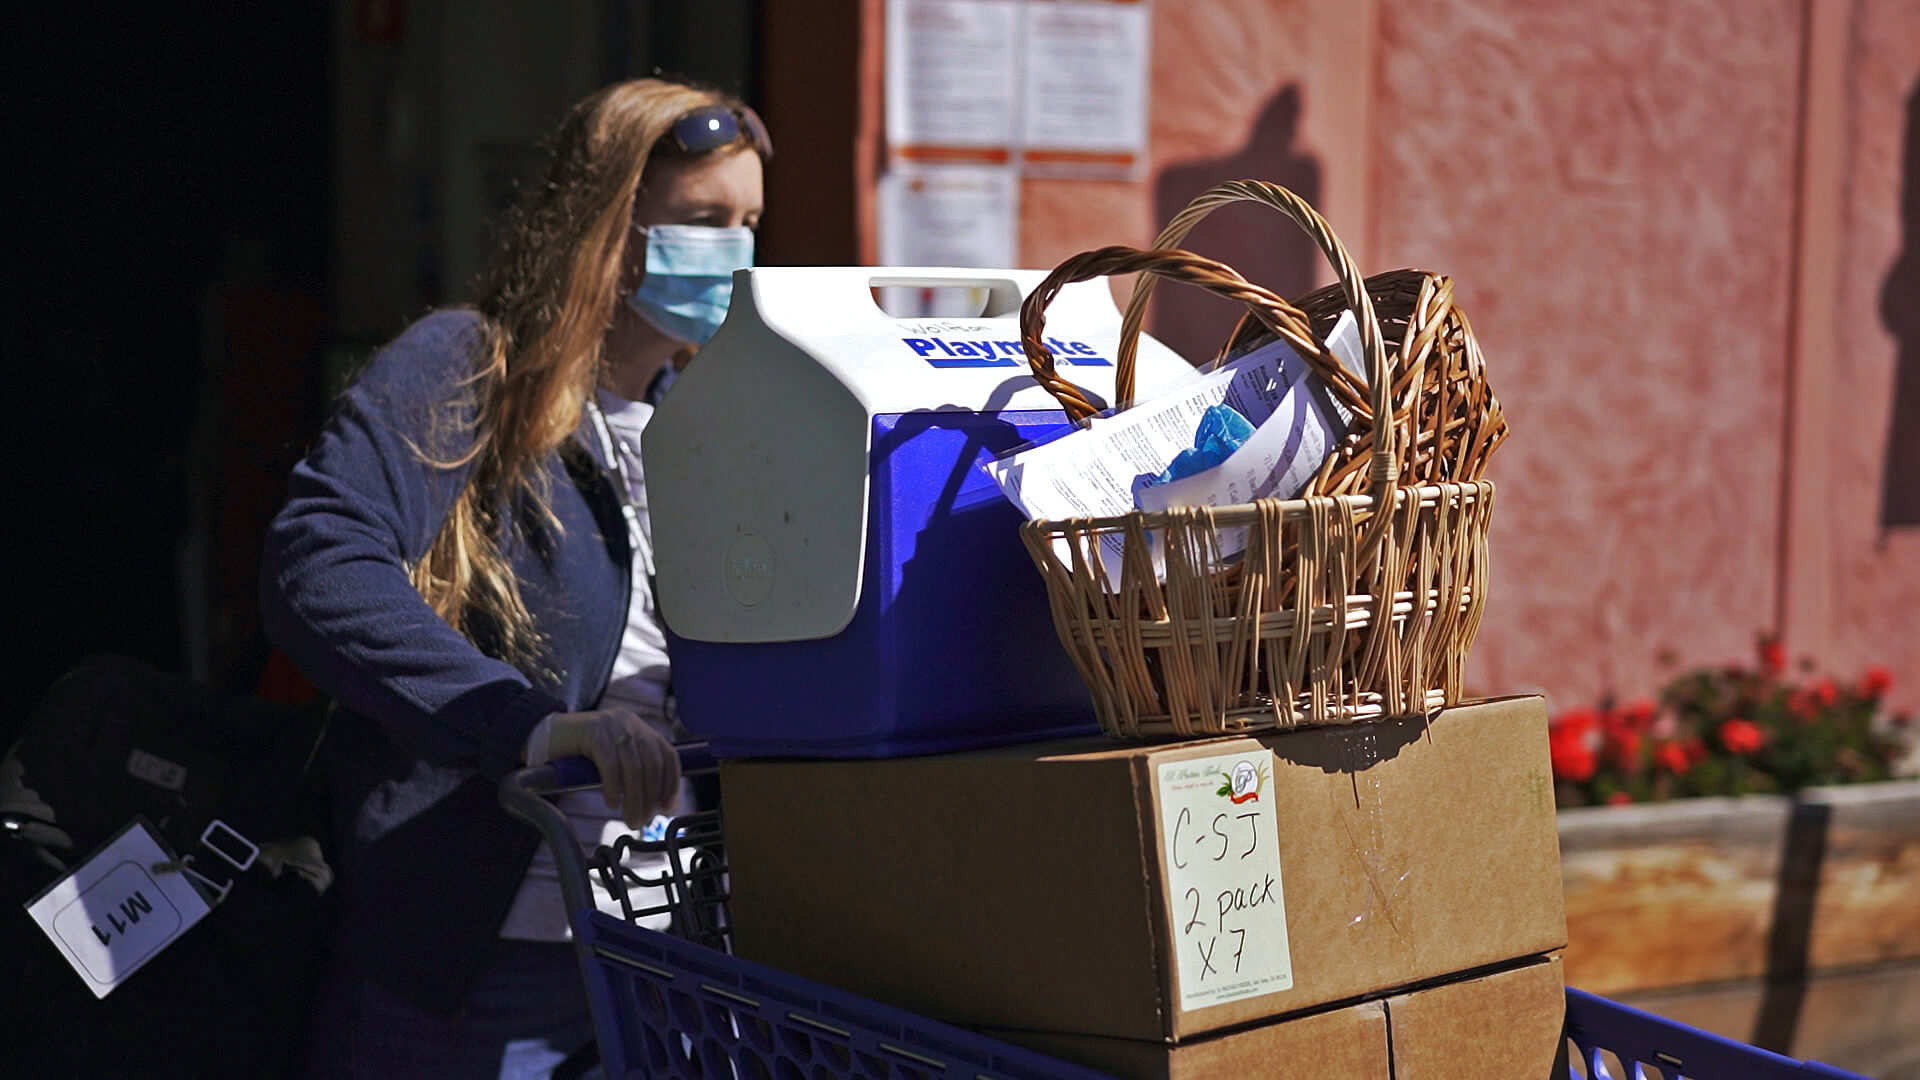 A female volunteer pushes a cart full of food donation while wearing a face mask.